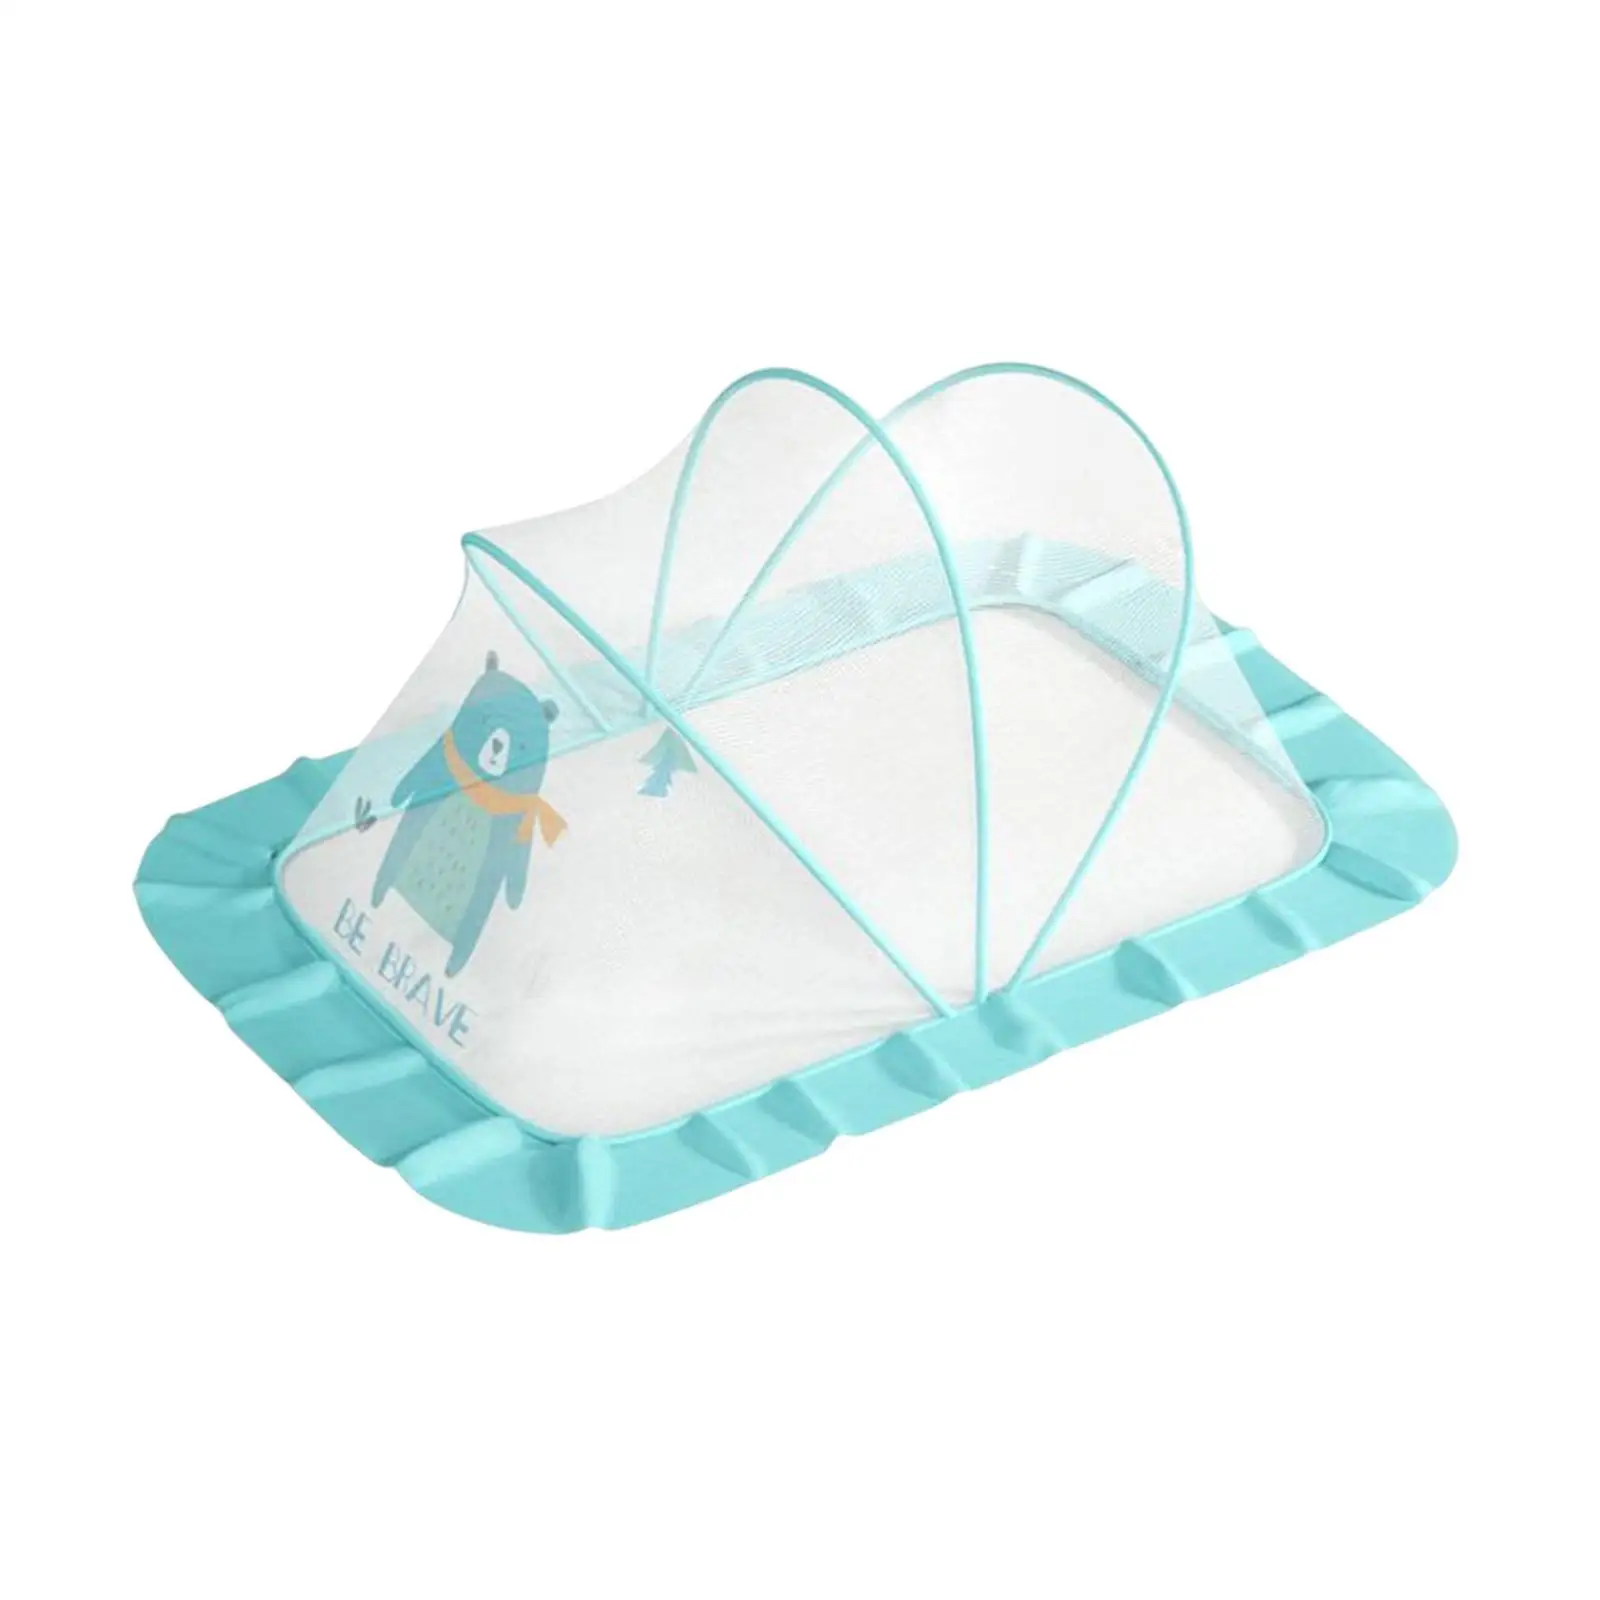 Folding Baby Cots Net ,beds Cover ,High Density Grids Bottomless Lightweight for Kids, Toddlers